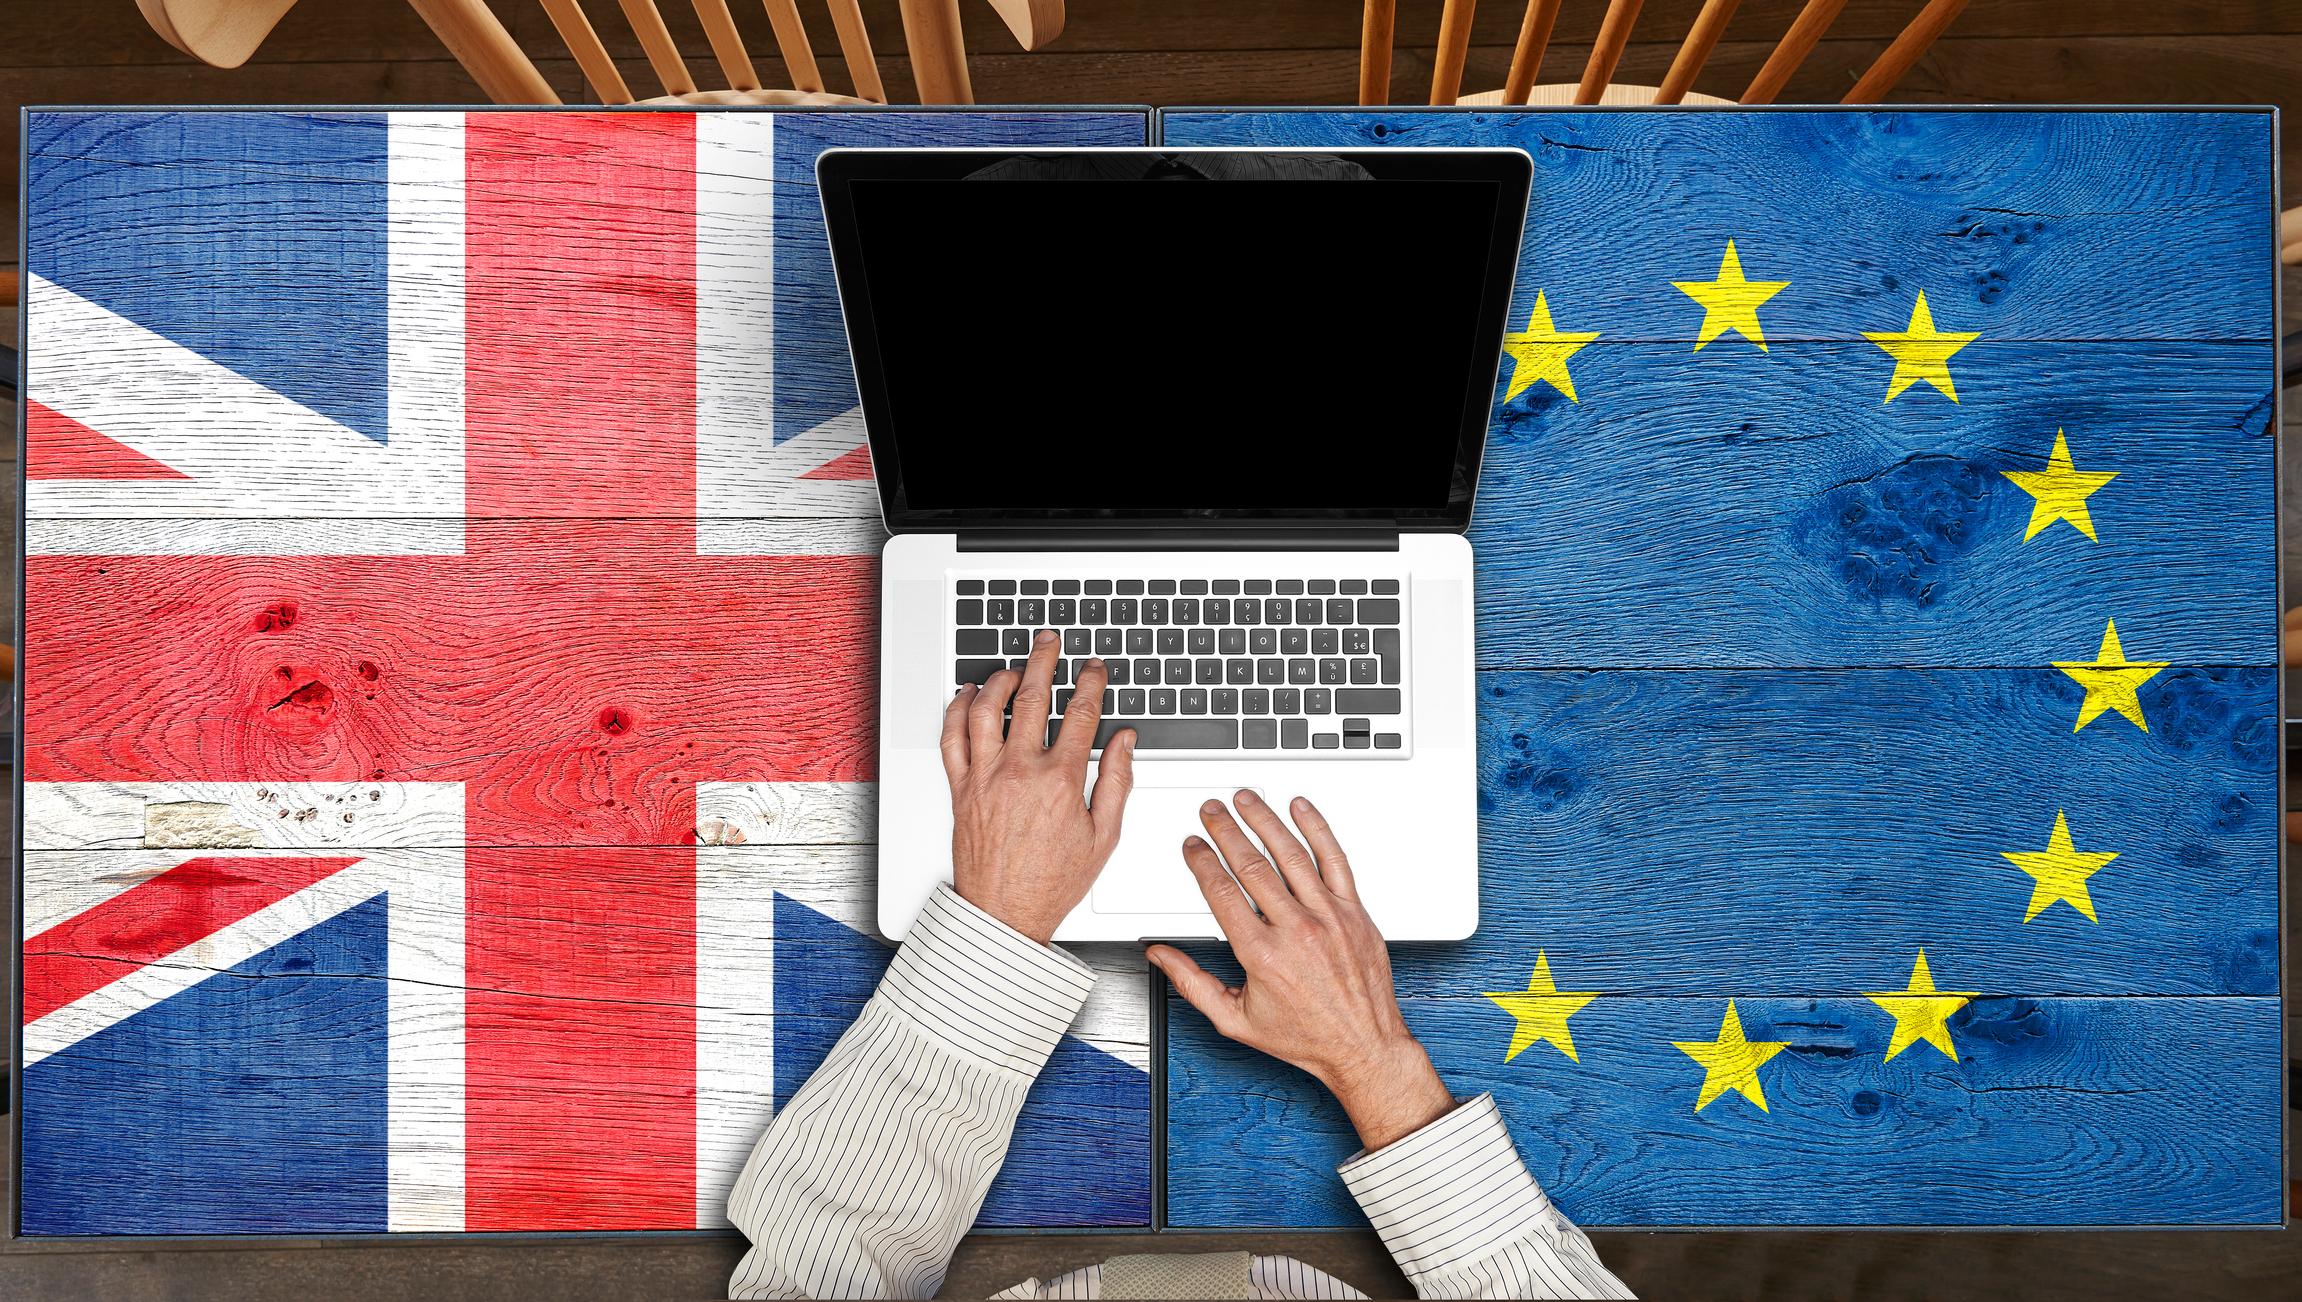 European and UK flagged wooden tables with laptop